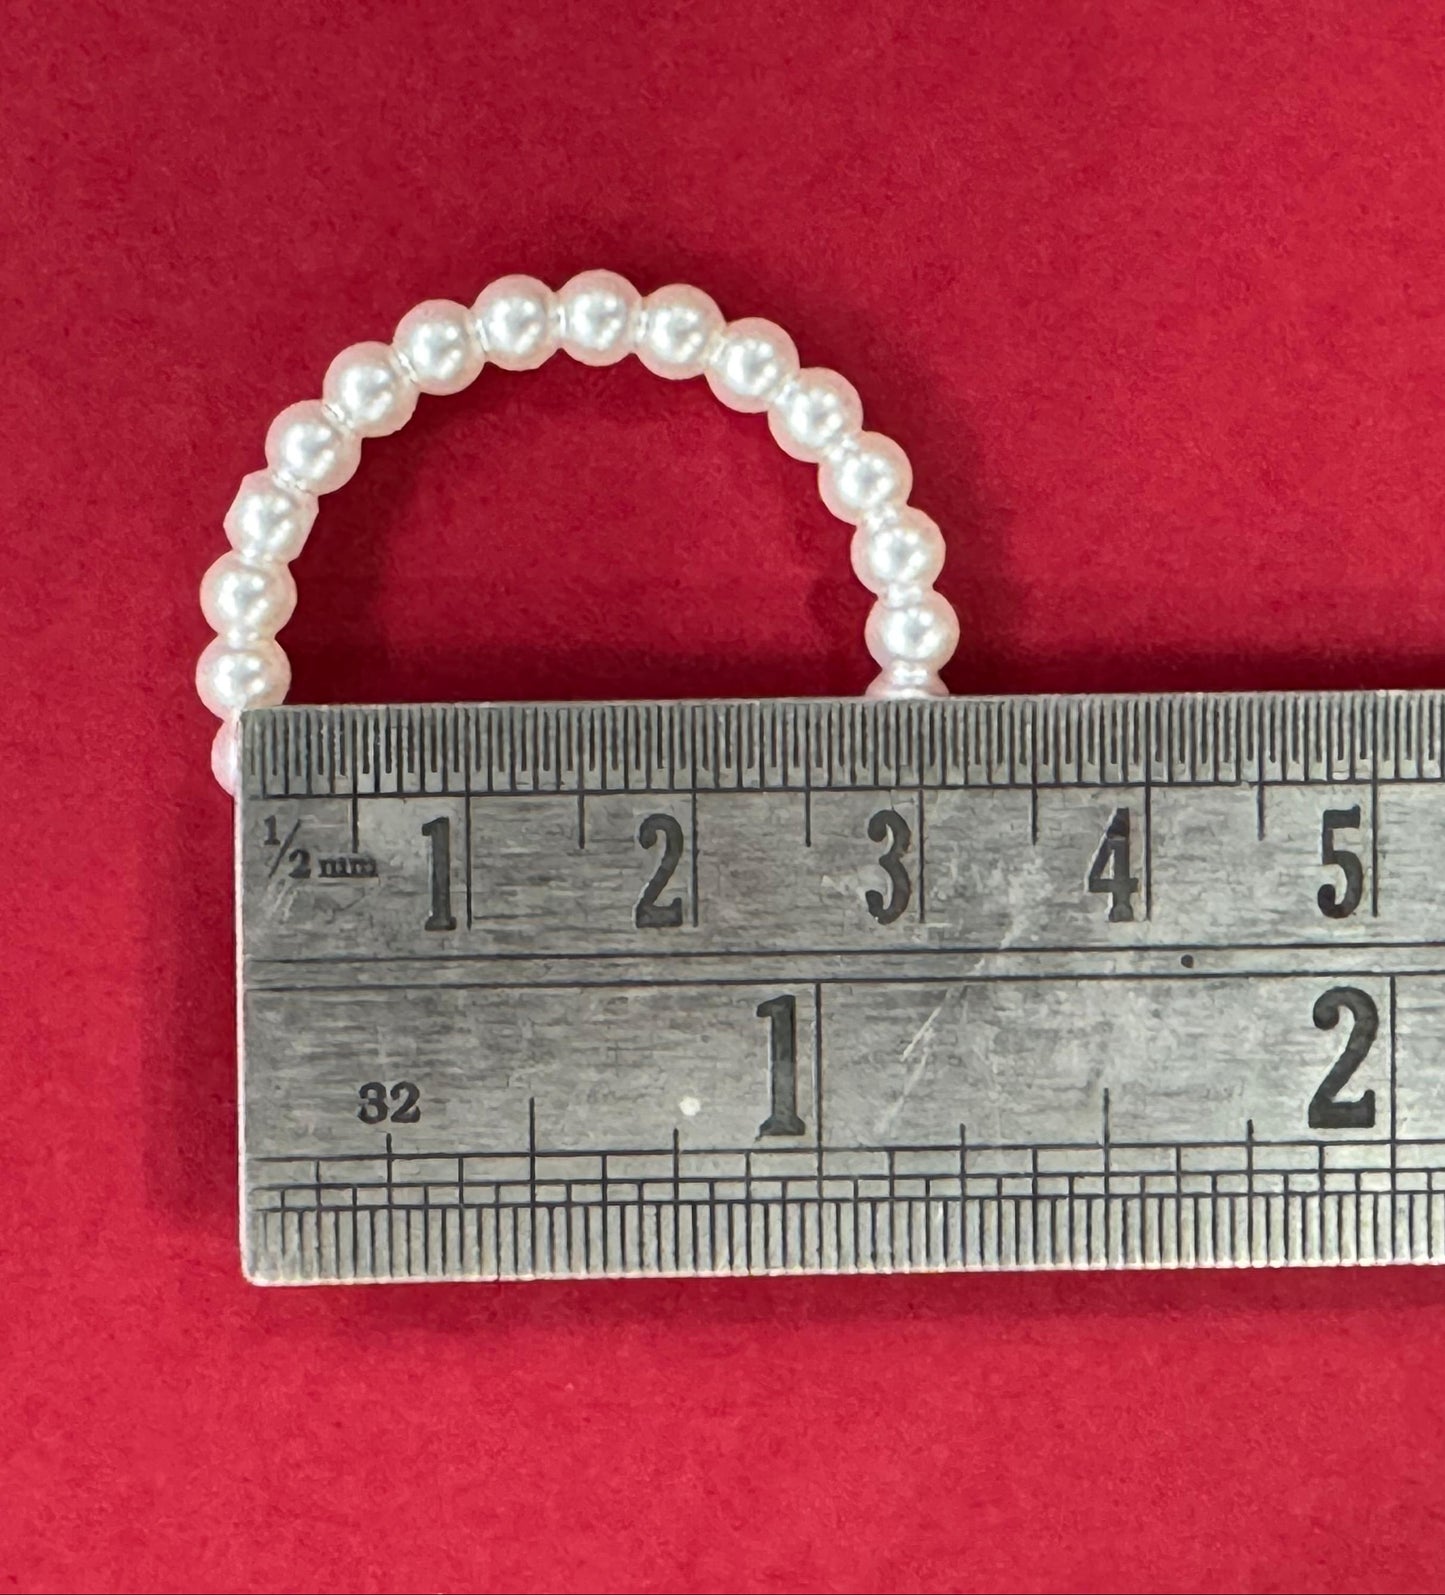 Pearl Ring - 10 pieces